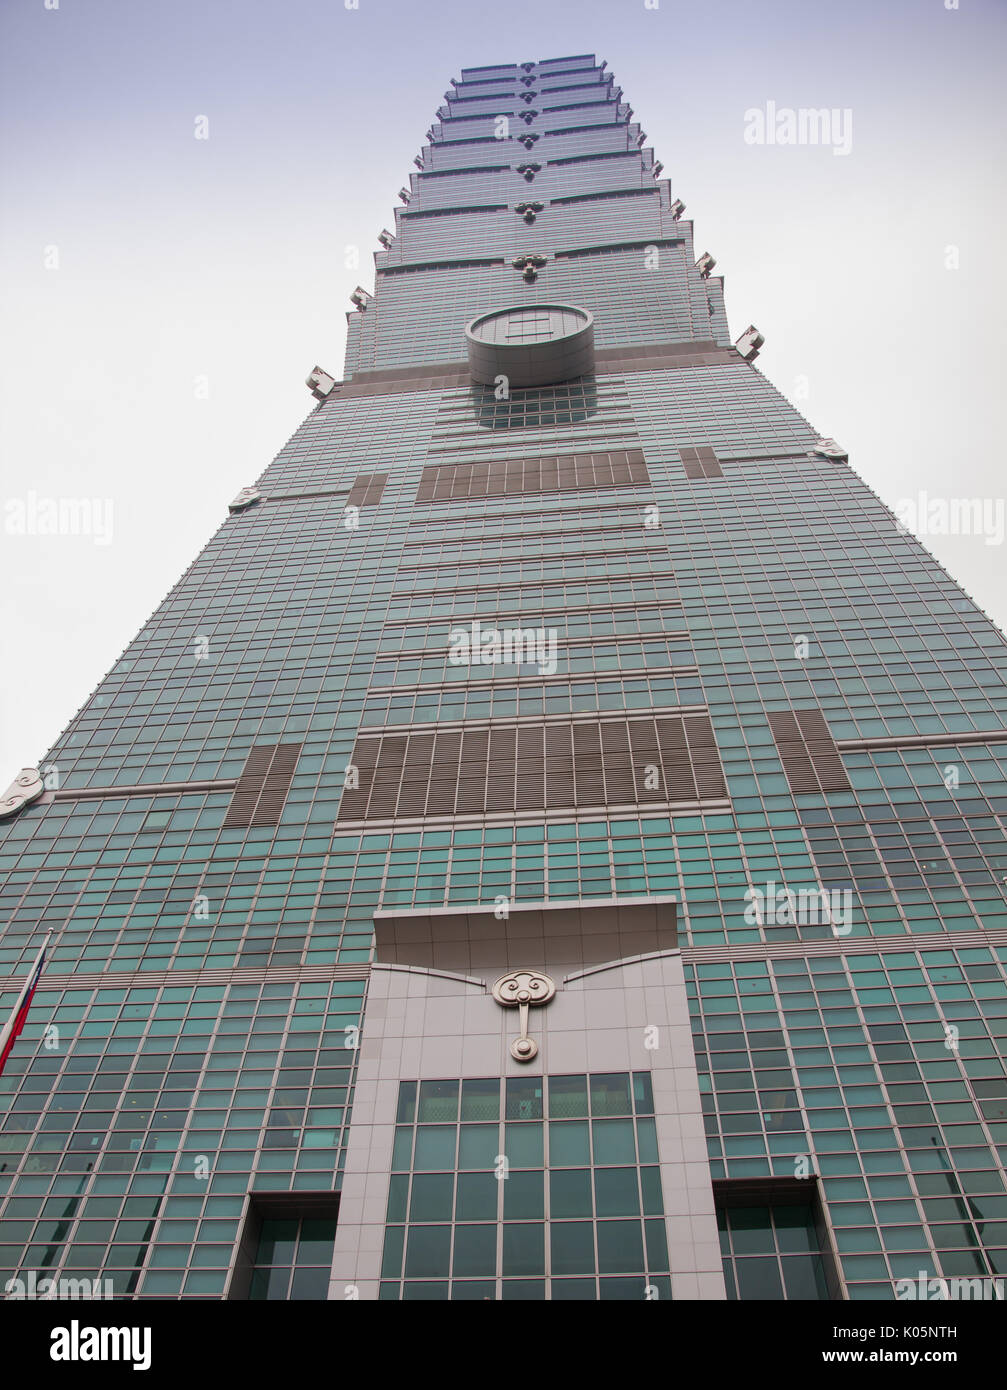 Taipei 101 perspective view from the bottom Stock Photo